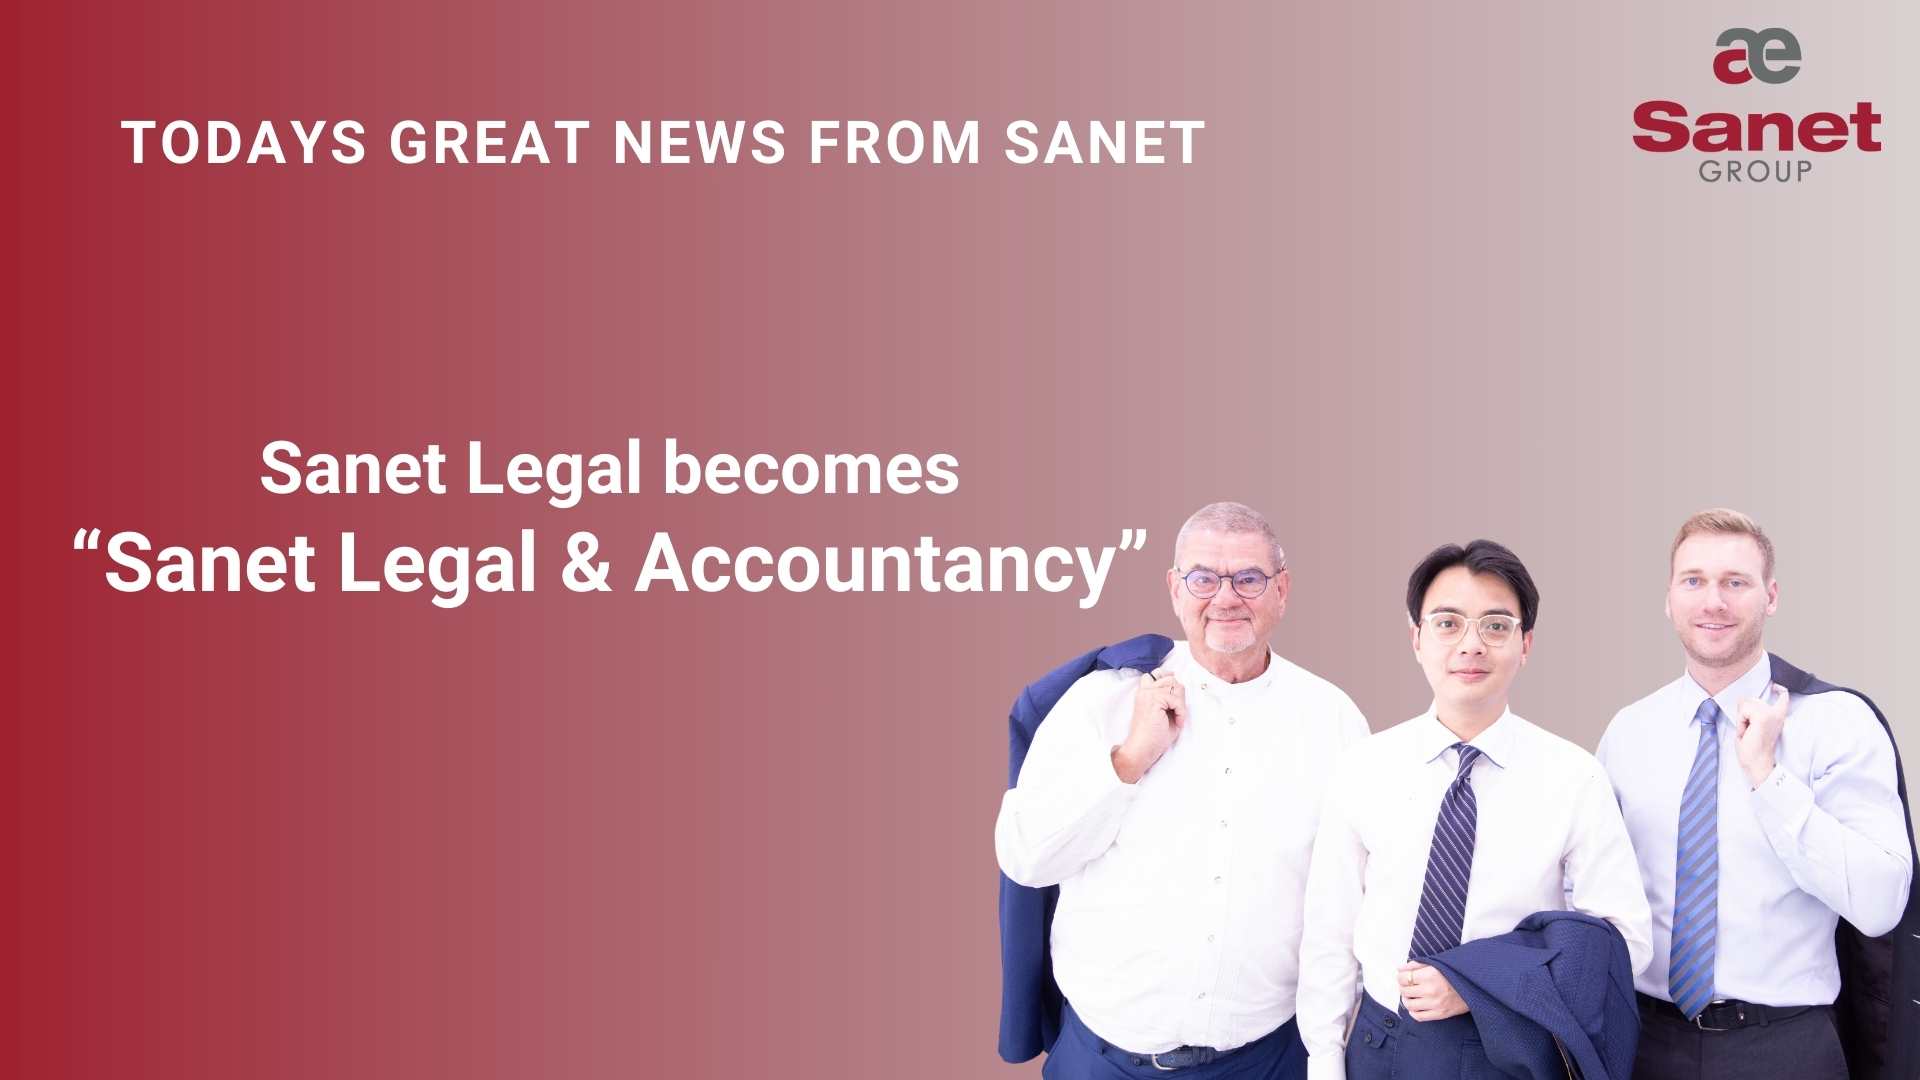 Sanet Legal & Finance offers customized accounting for SMEs in Thailand including reporting, evaluations, payroll and tax returns